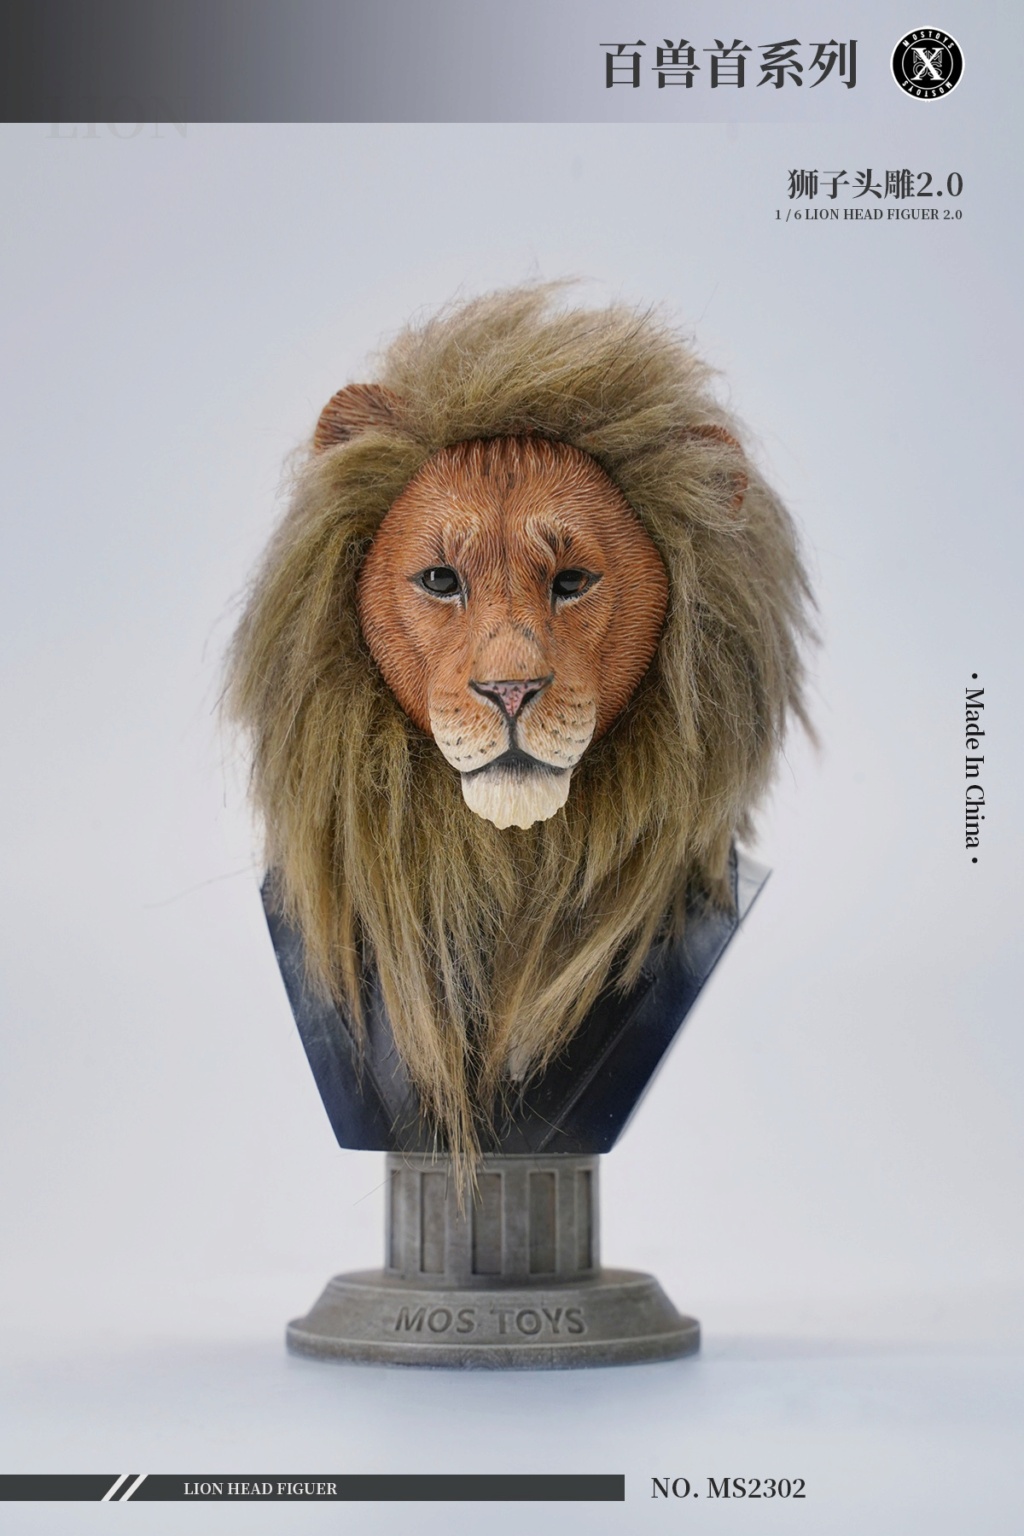 accessory - NEW PRODUCT: Mostoys: 1/6 MS2302 lion head sculpture 2.0 16234910